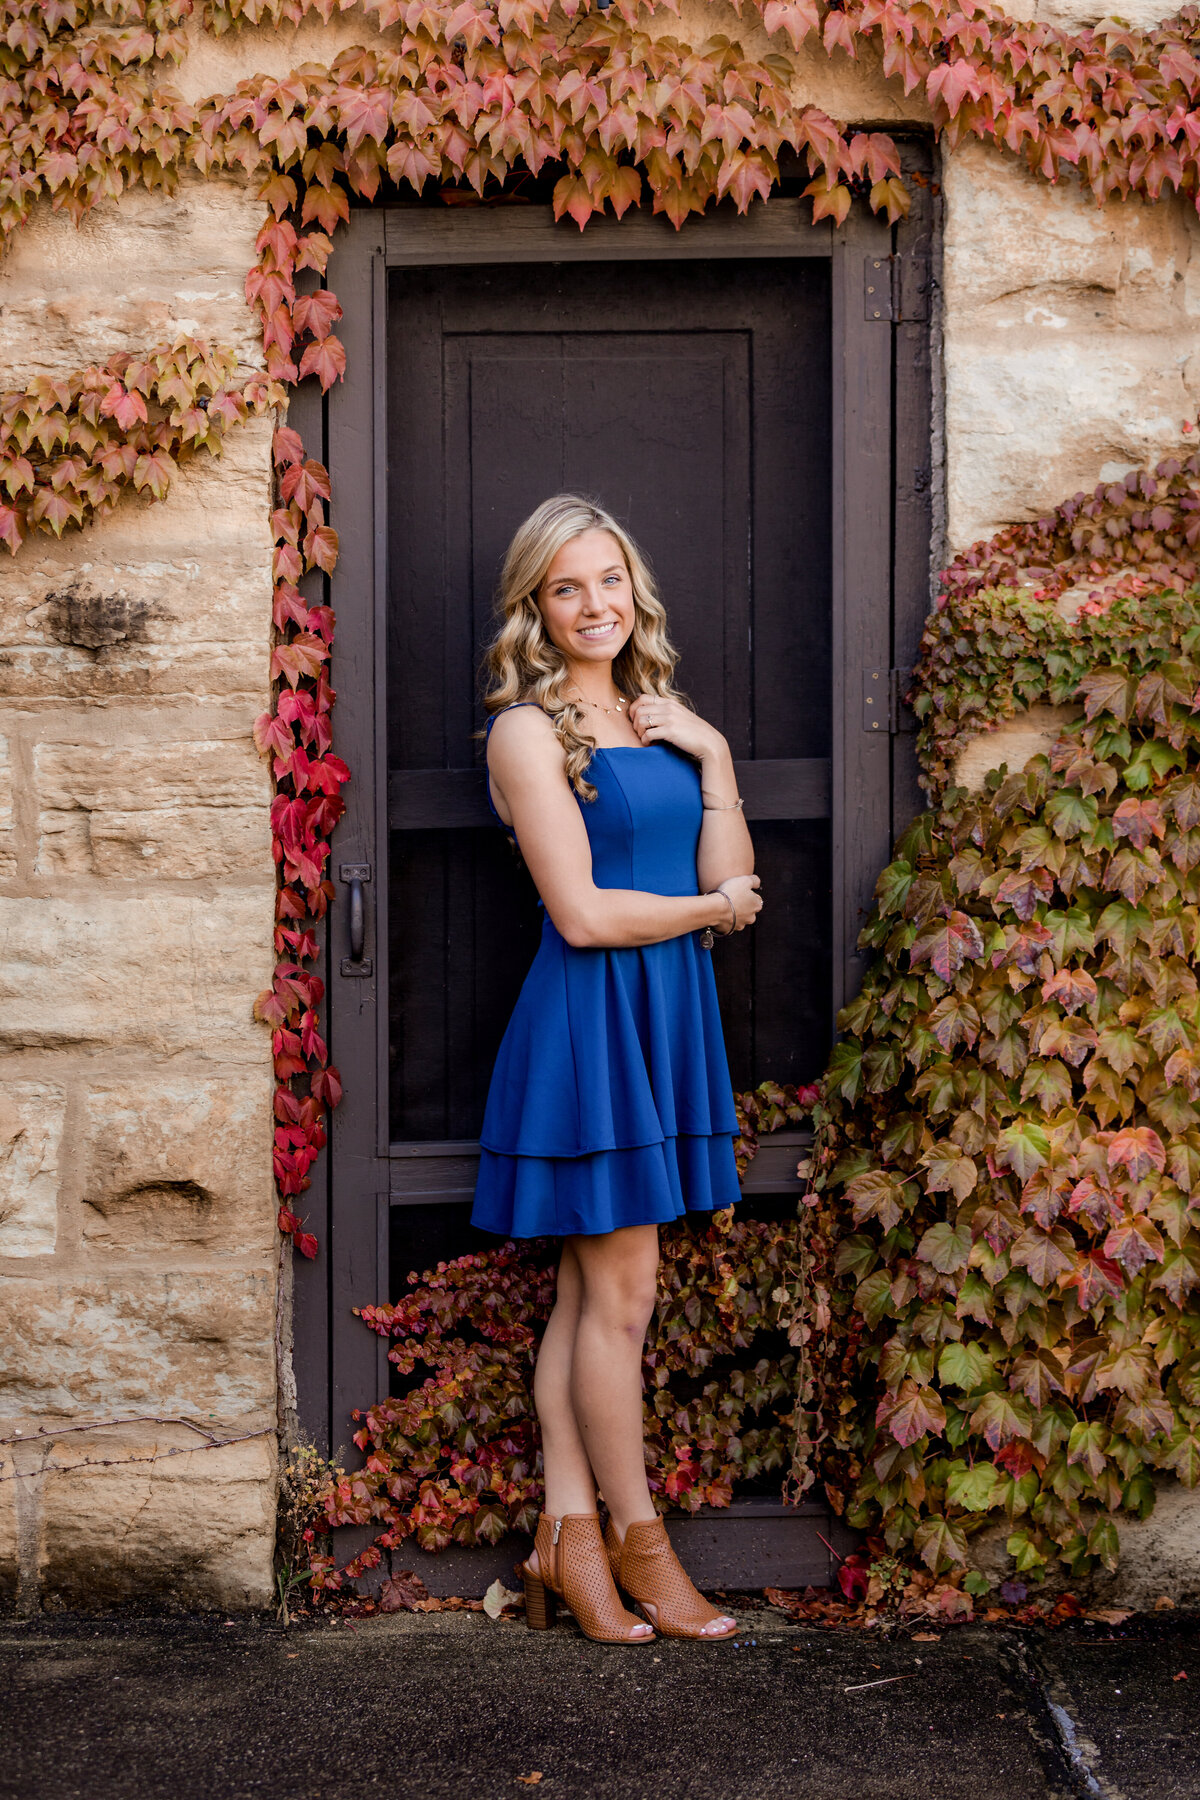 A high school girl poses in a blue dress by a colored ivy wall in fall.